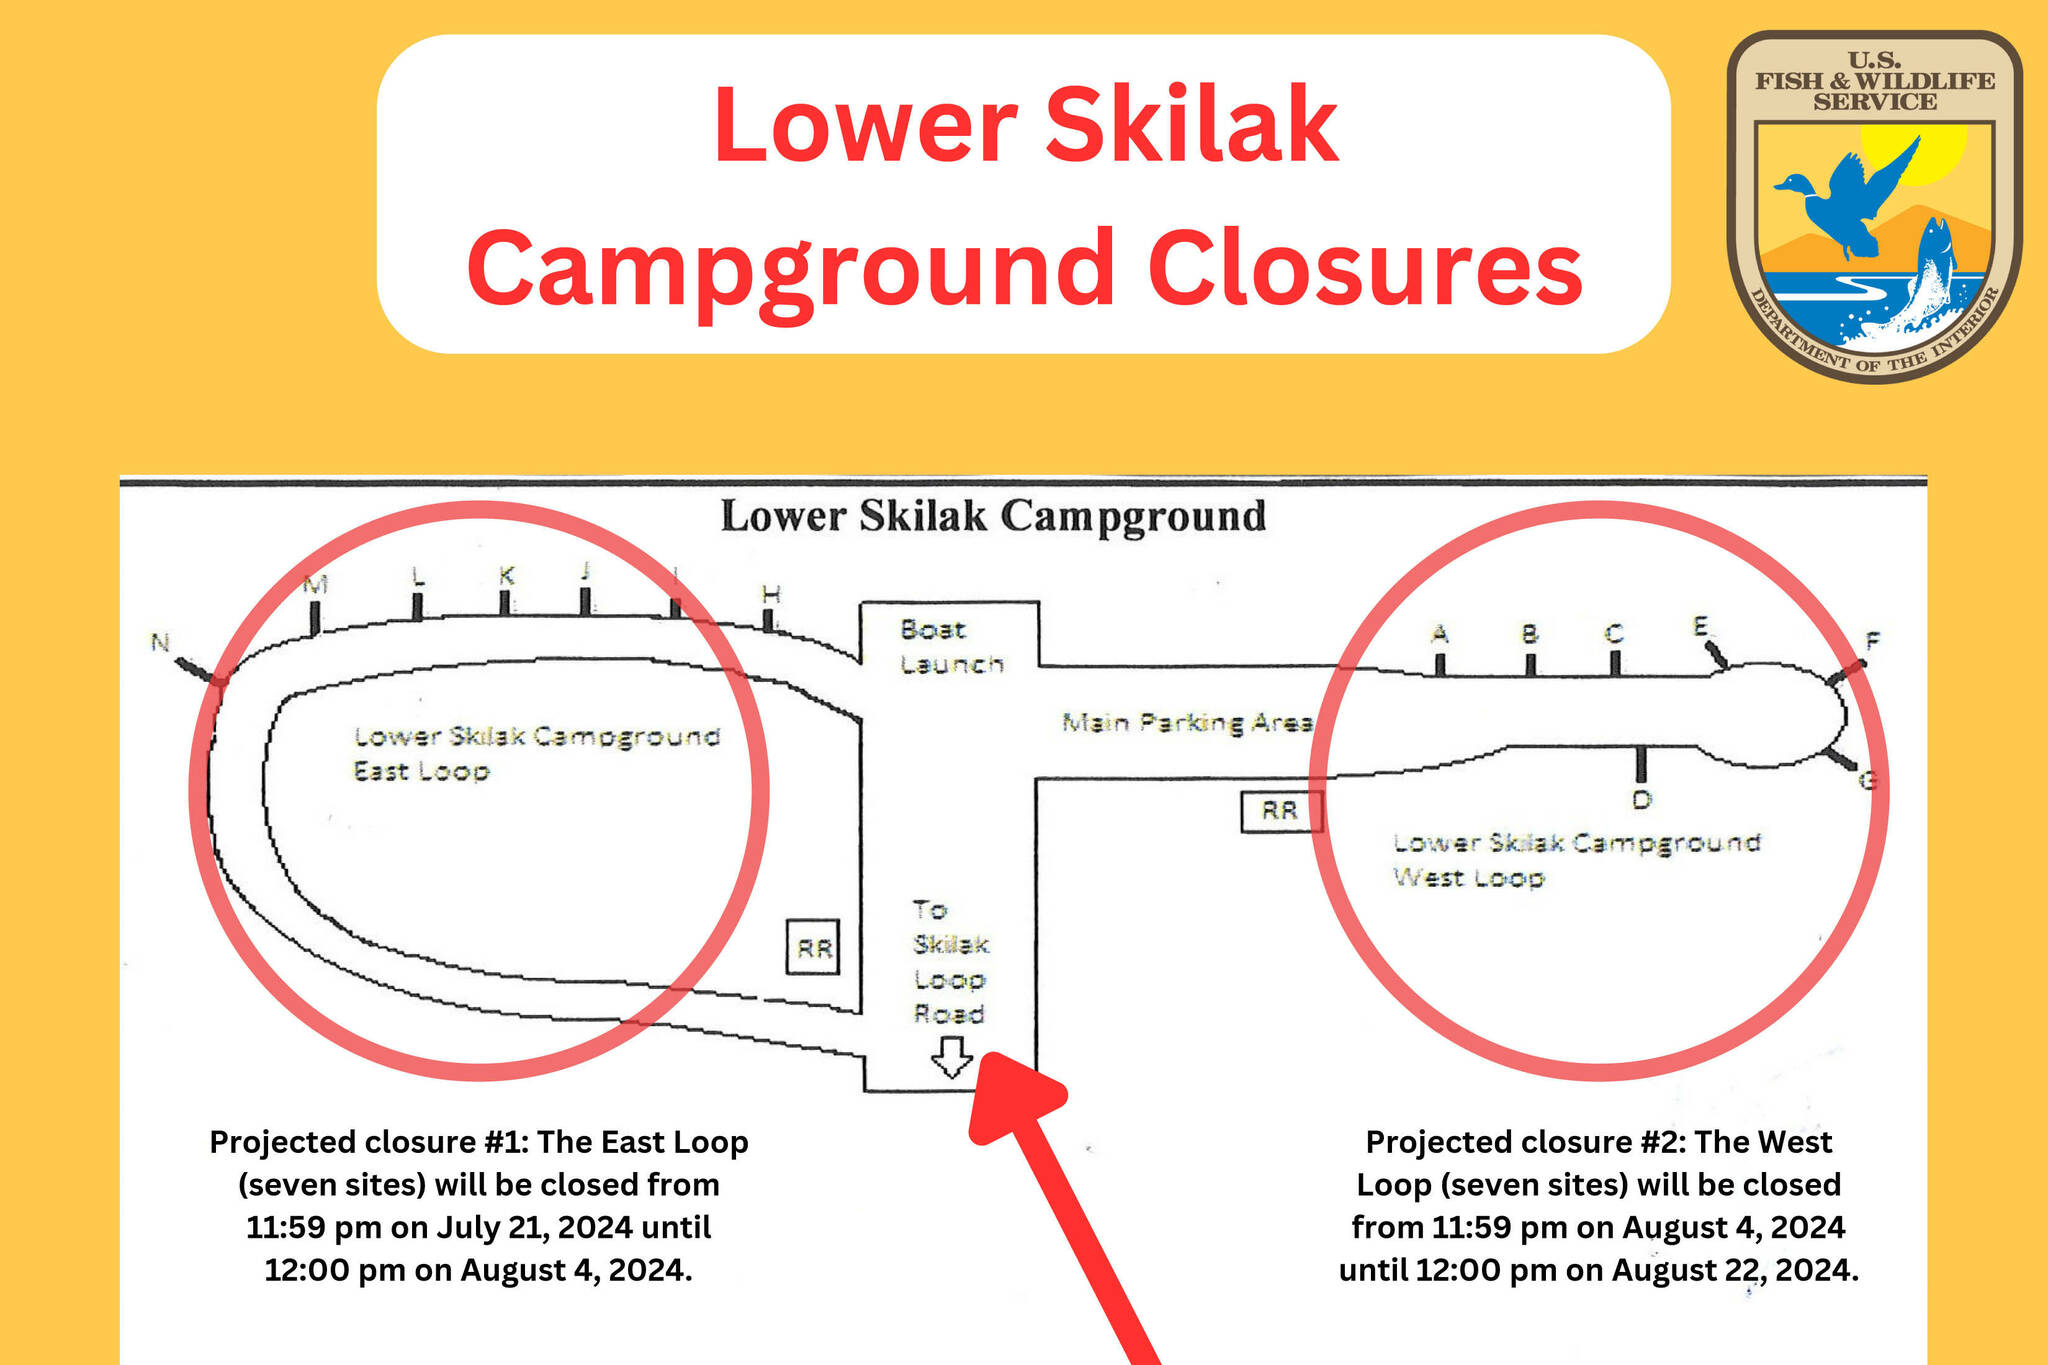 A map of Lower Skilak Campground shows the areas that will be closed in July and August 2024. (Graphic provided by U.S. Fish and Wildlife Service)